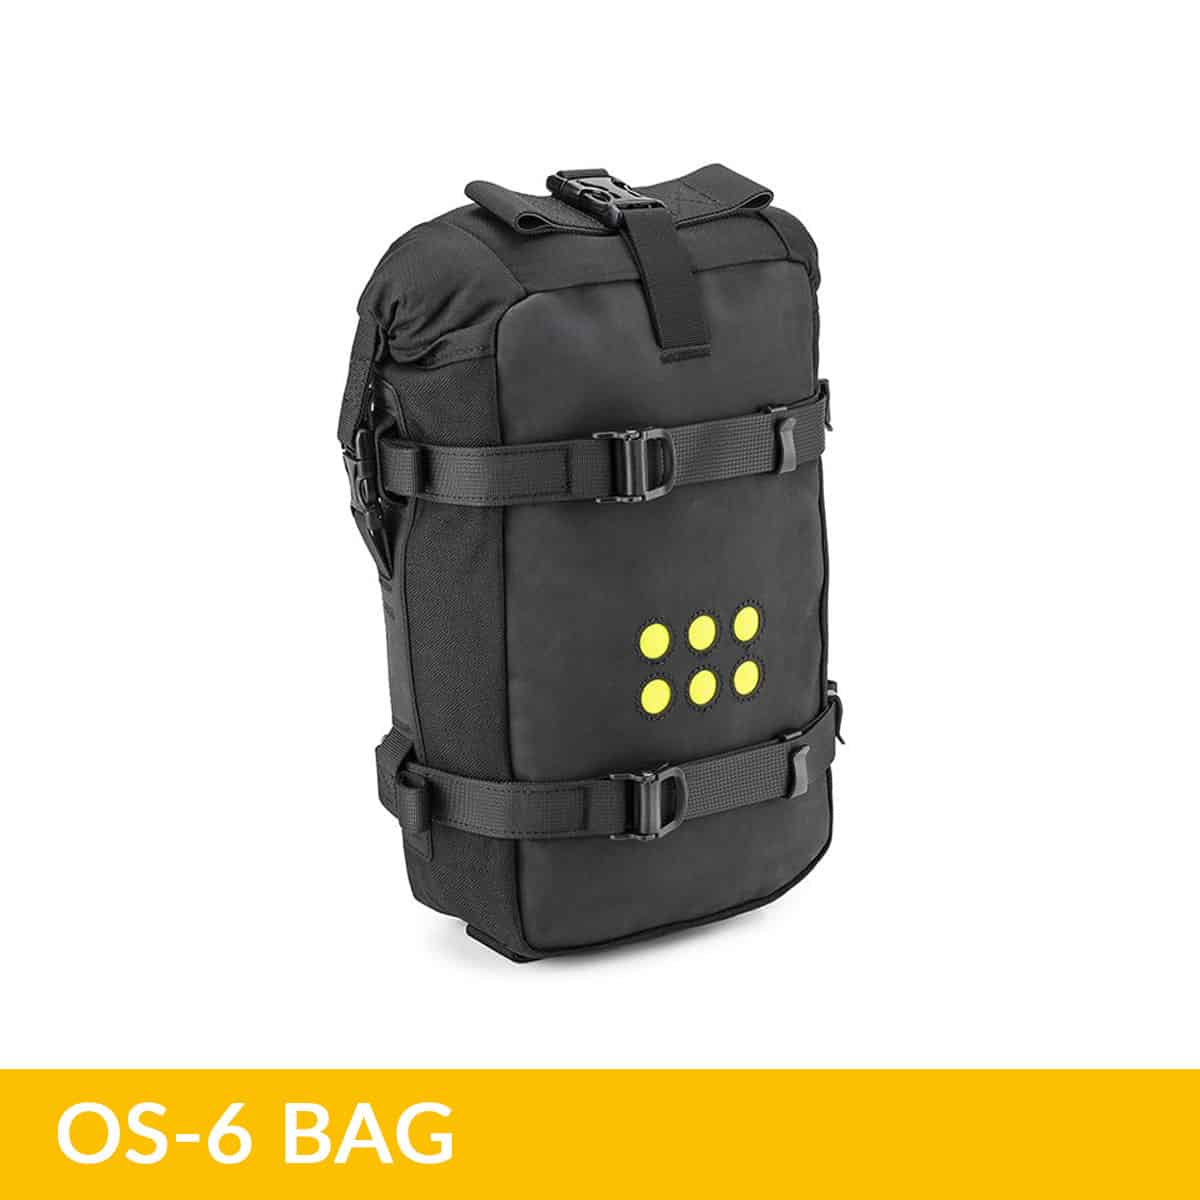 Kriega Overlander-S OS Packs: Serious luggage for serious adventures 6L Front